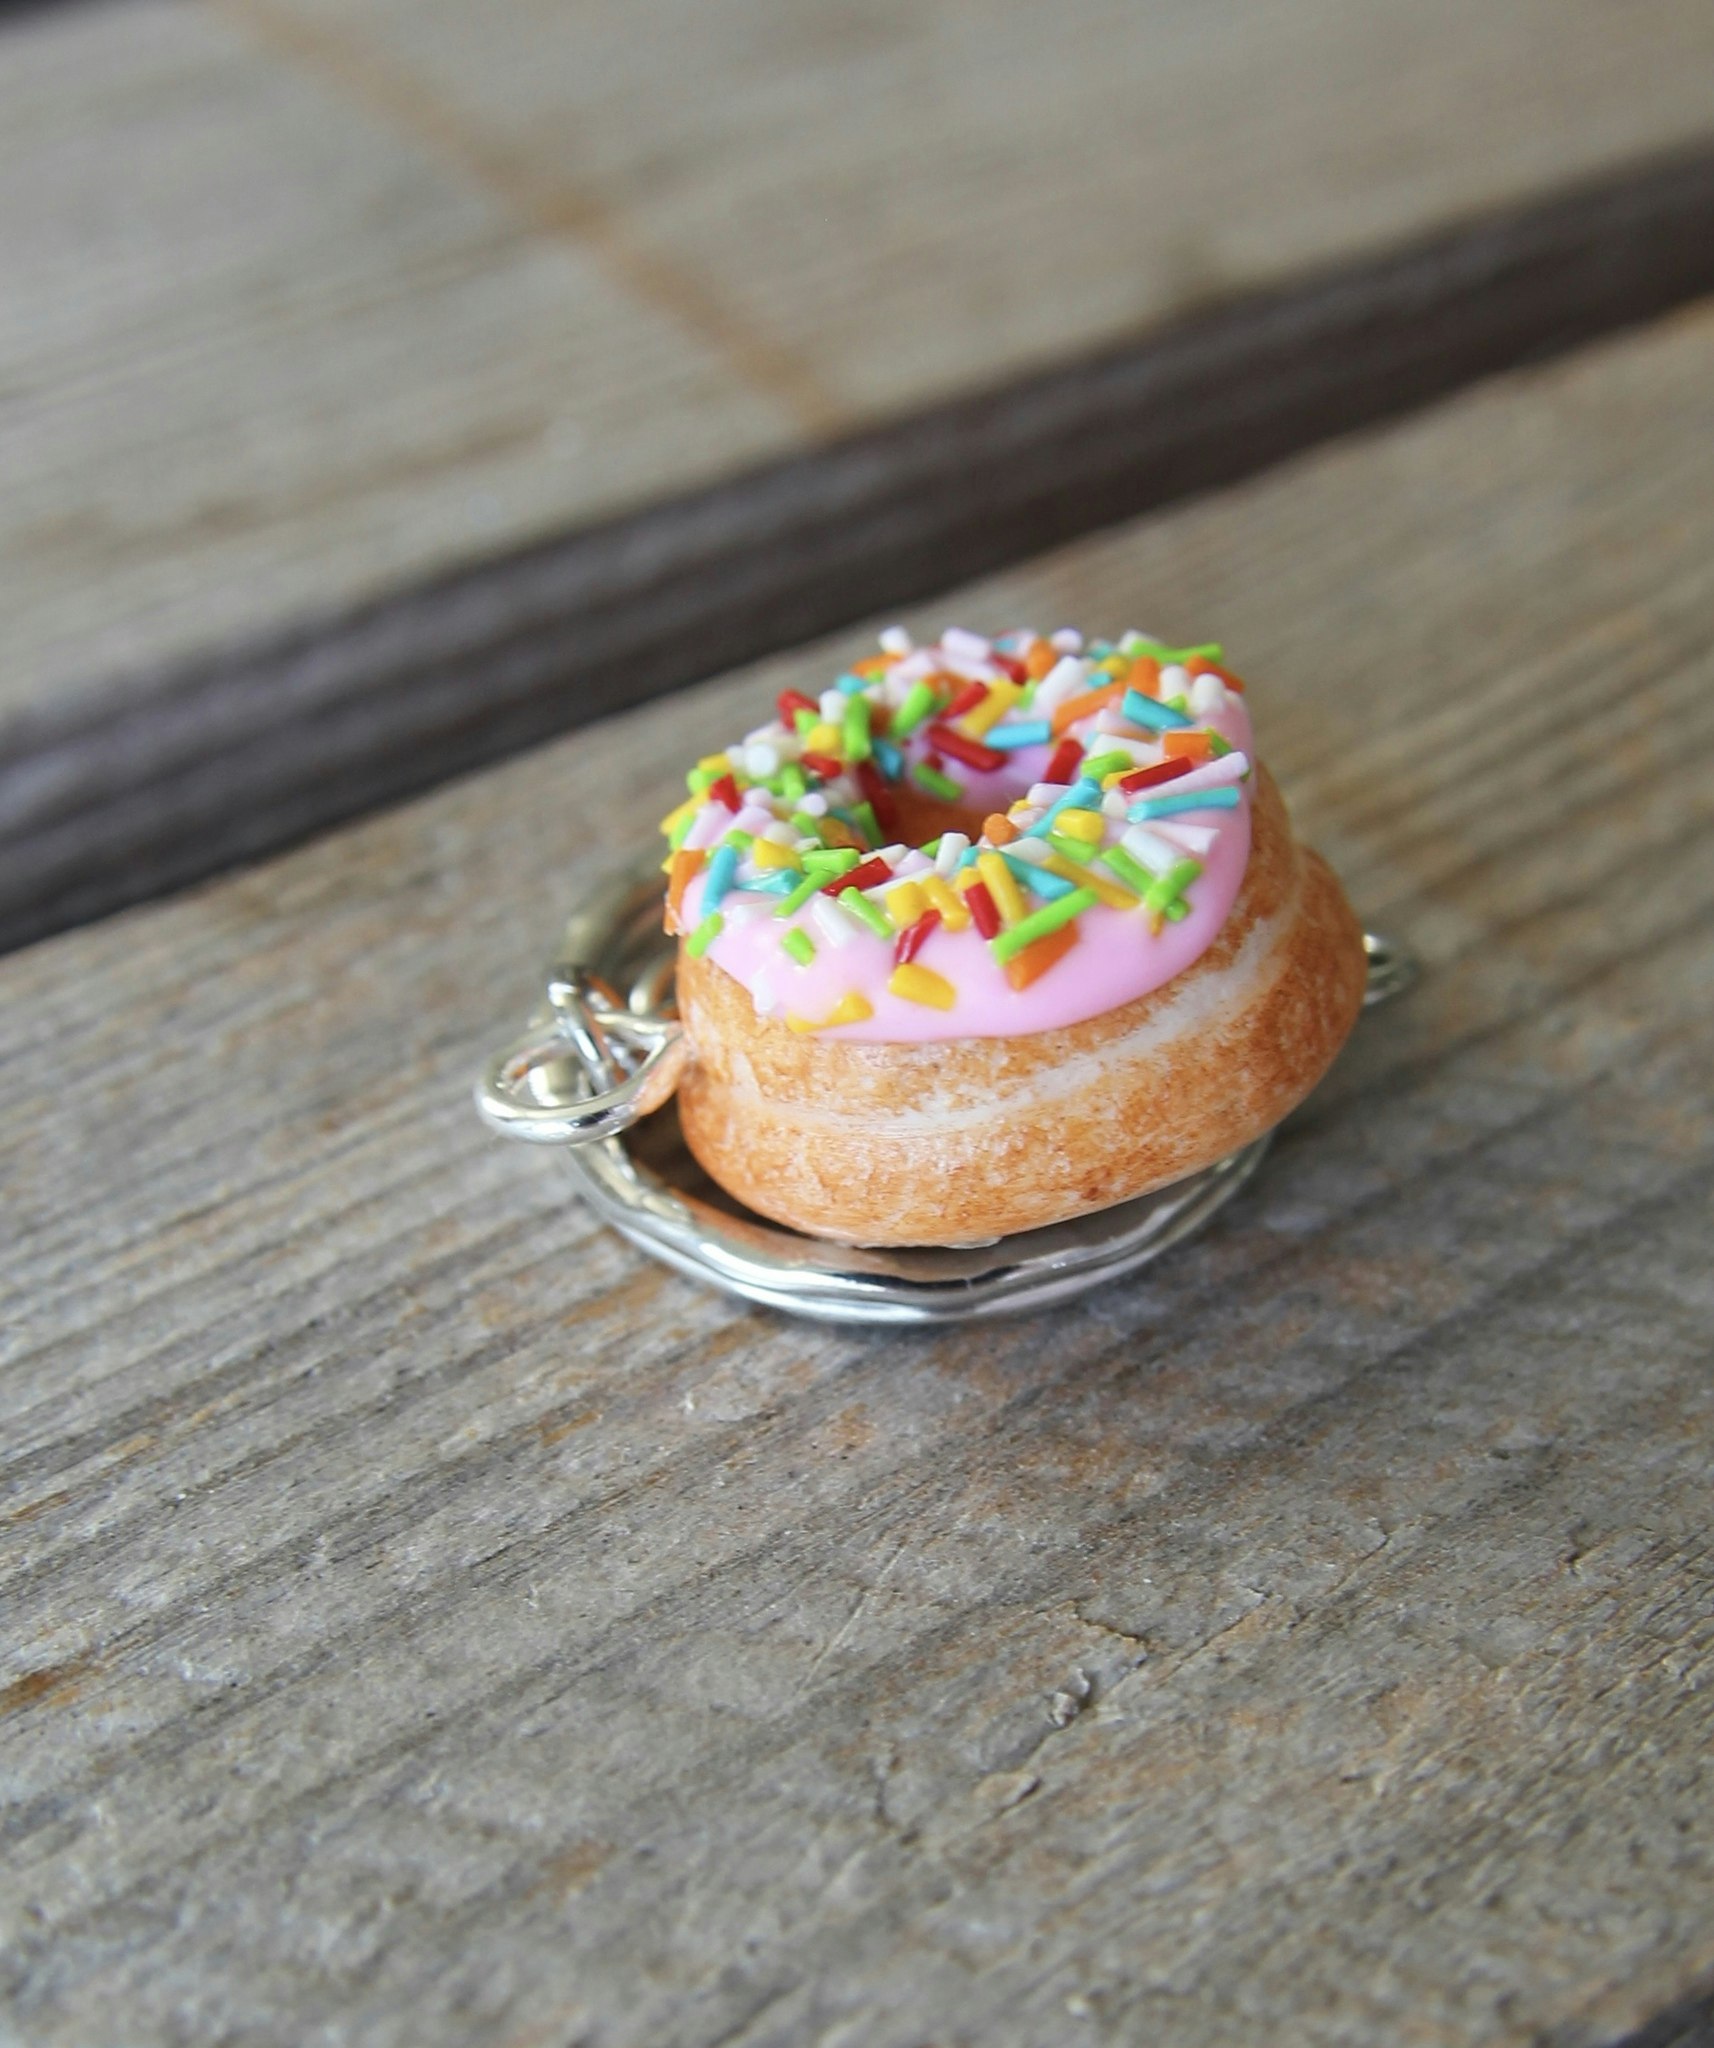 Keychain, donut with pink icing and sprinkles